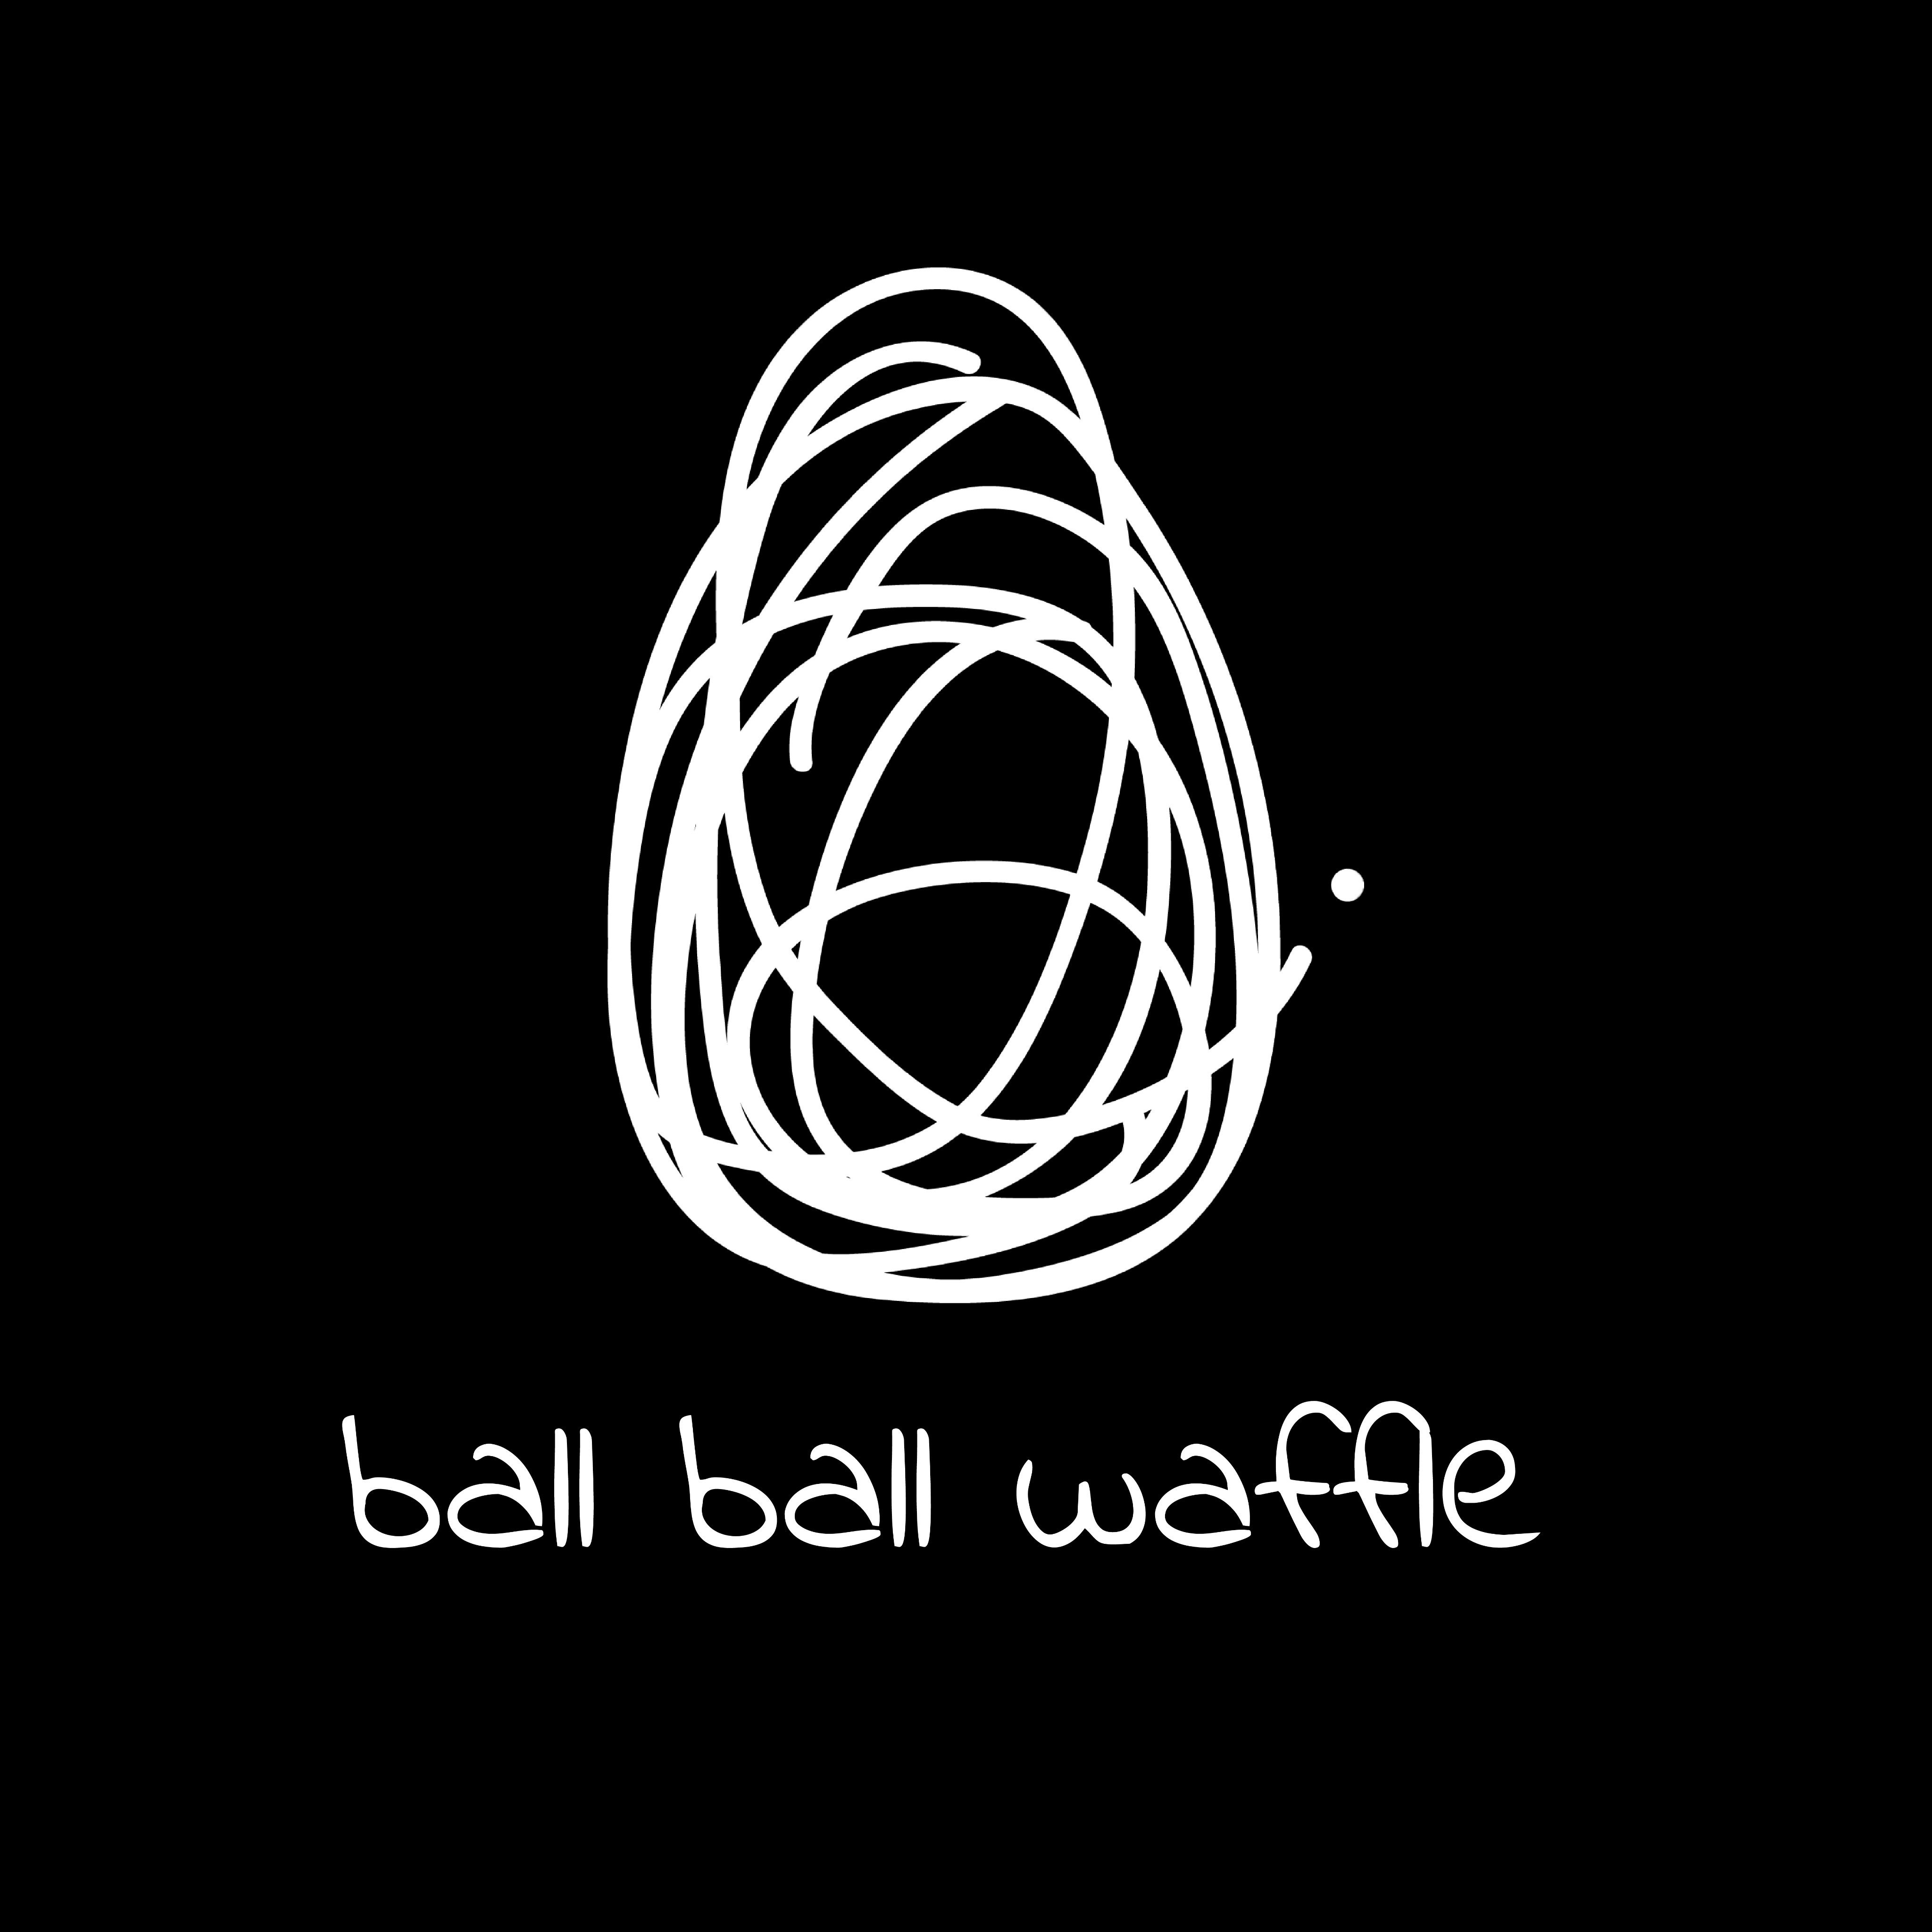 Ball Ball Waffle
Authentic HK Style street food